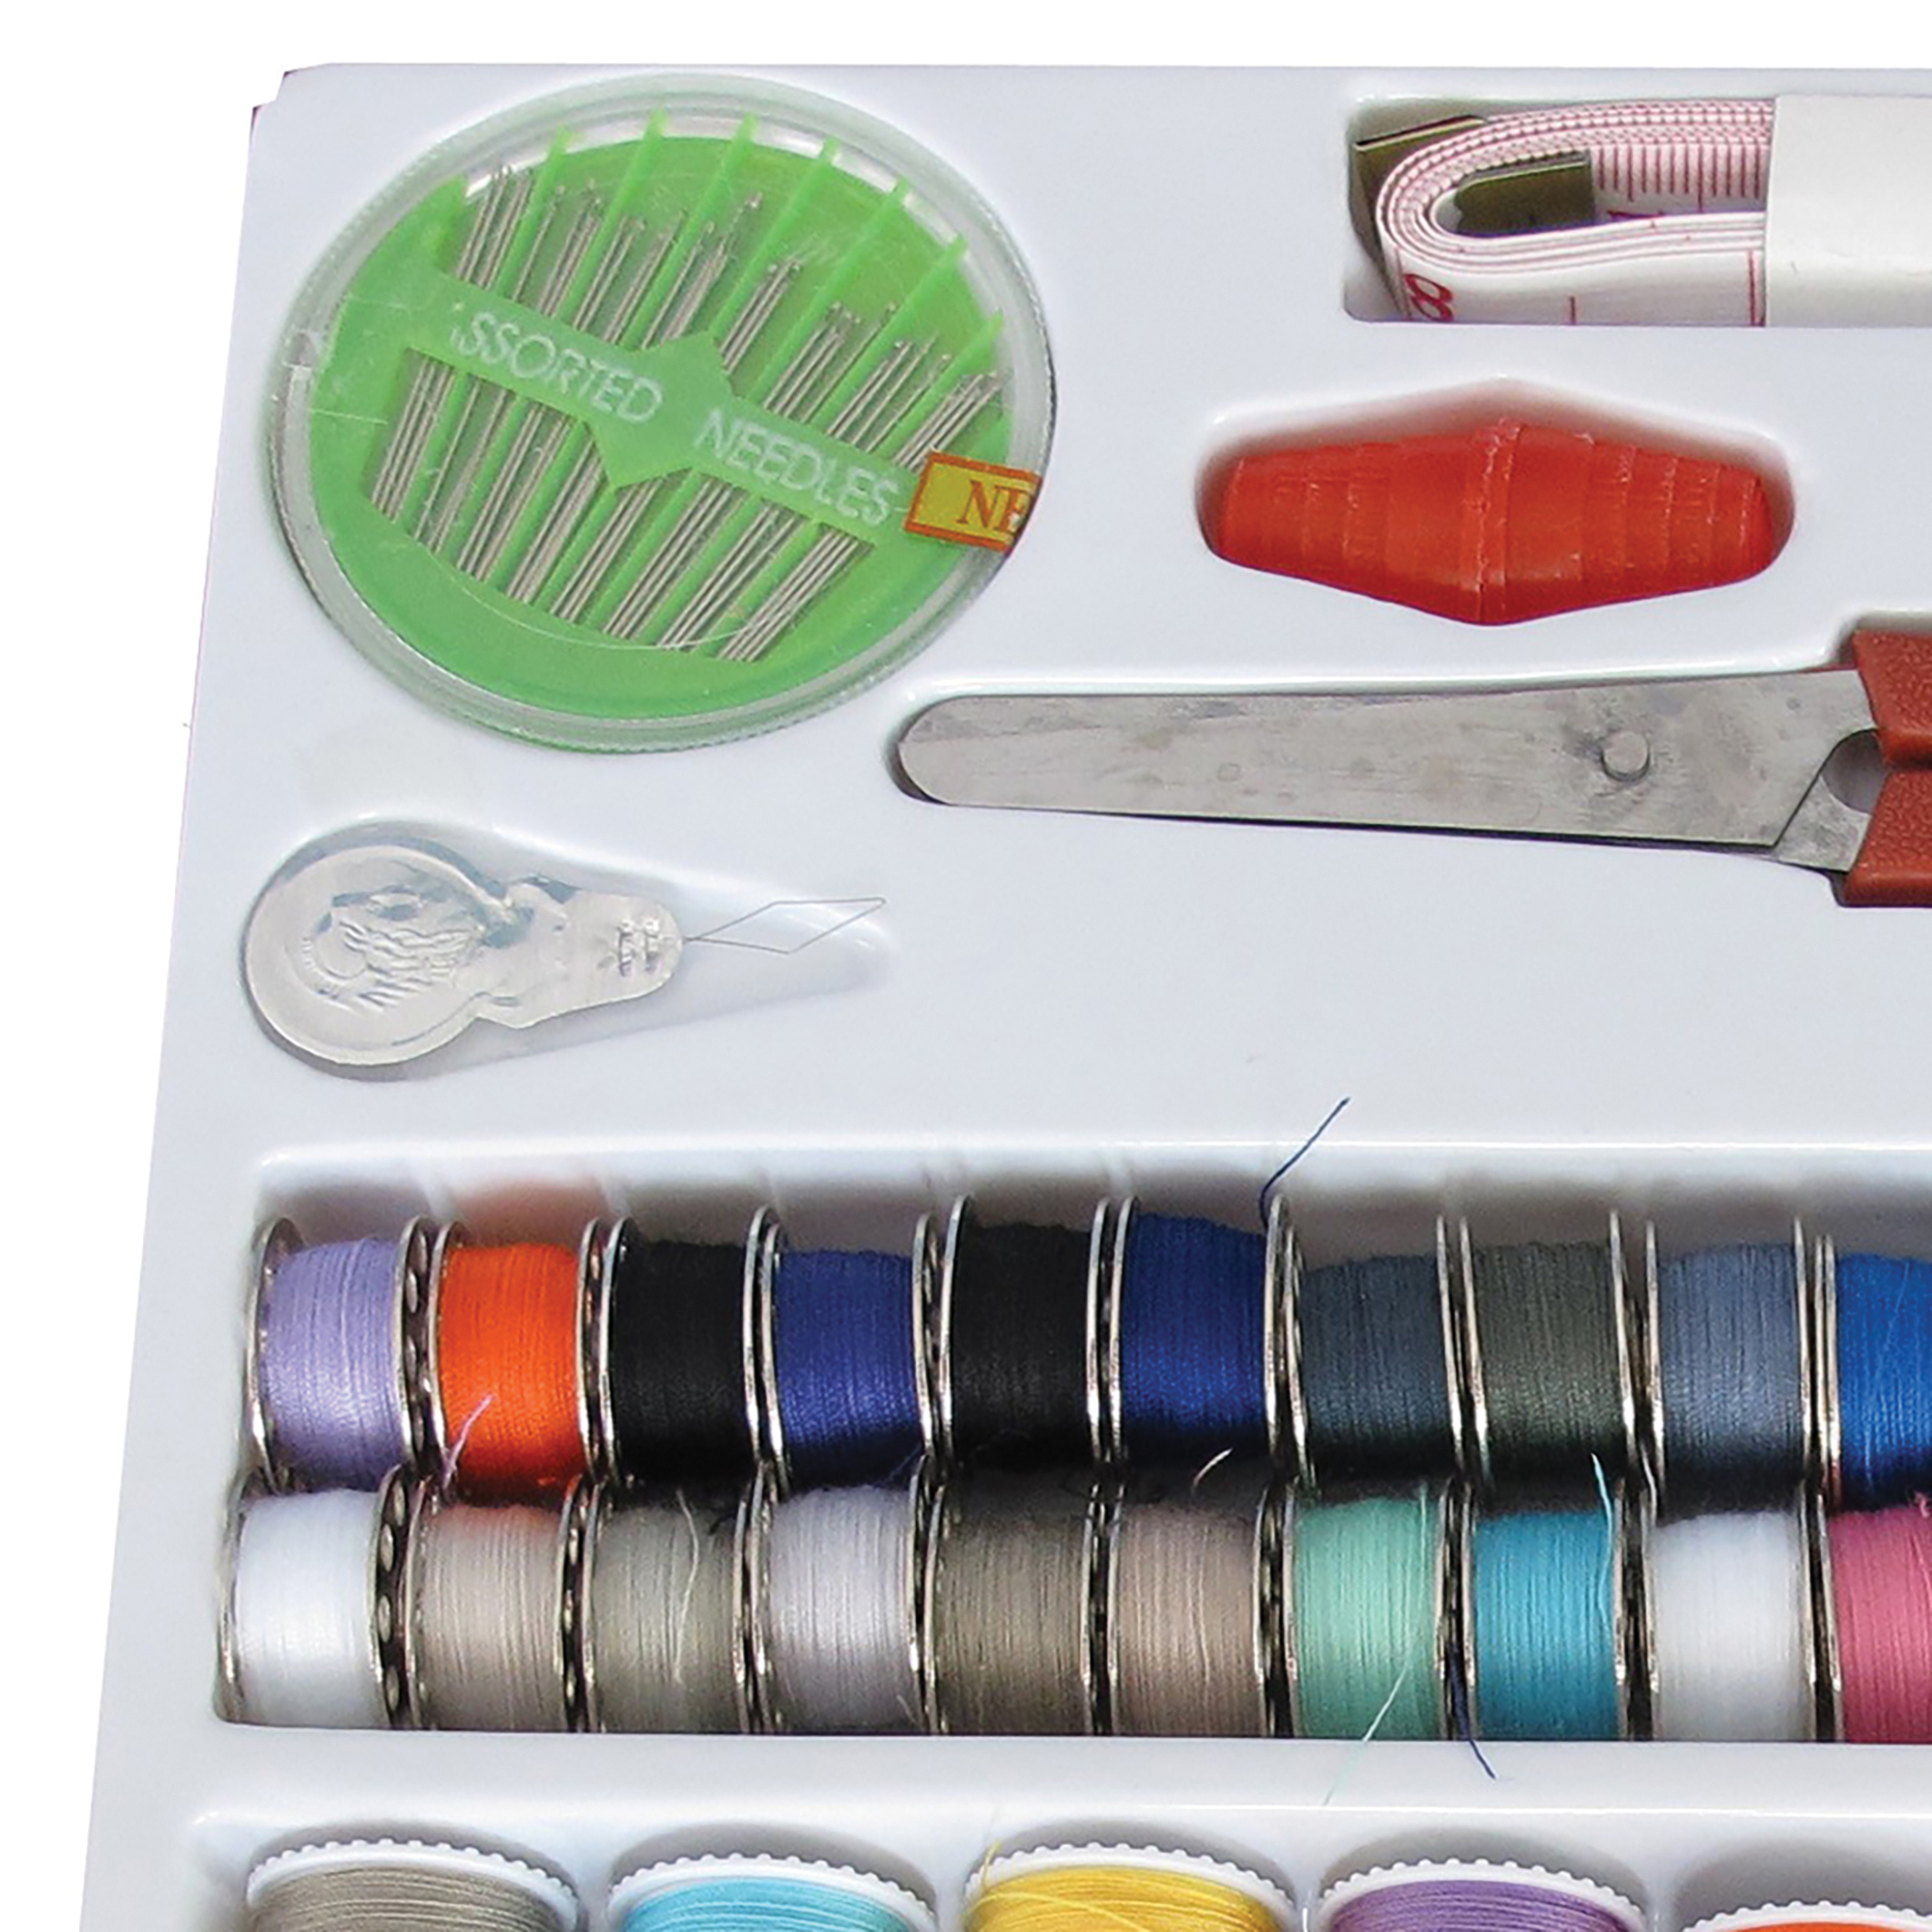 Michley Fs-092 Sewing Kit With 100 Pieces Including Thread Spools, Bobbins, Scissors, Needles, Thimbles, And More - image 4 of 5